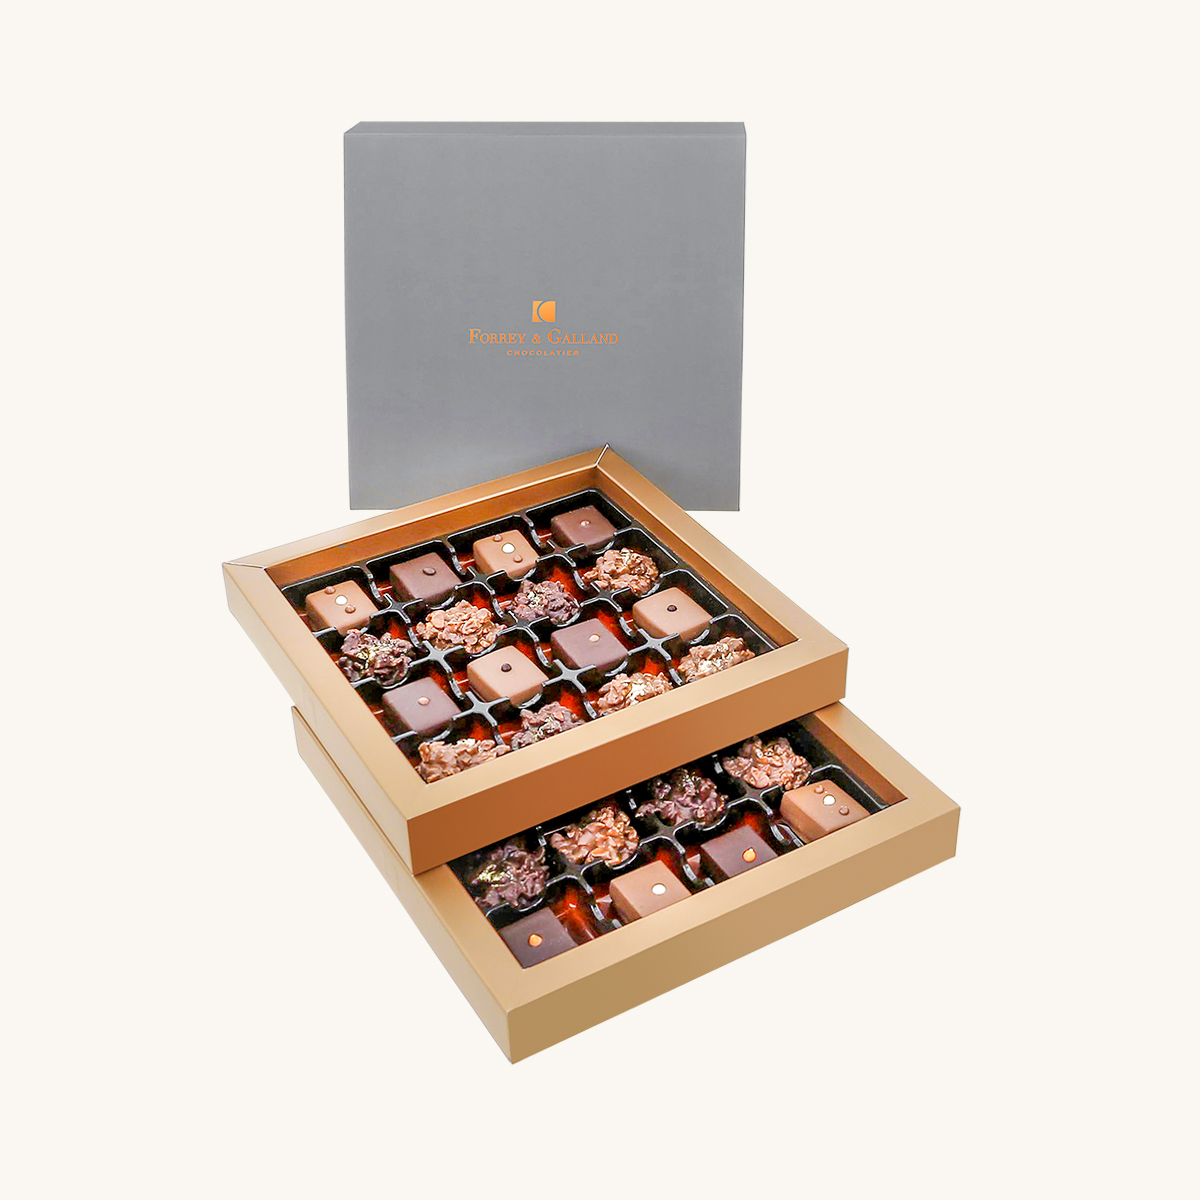 Forrey & Galland premium chocolate box filled in with 32 pieces of sugar free handmade chocolates.